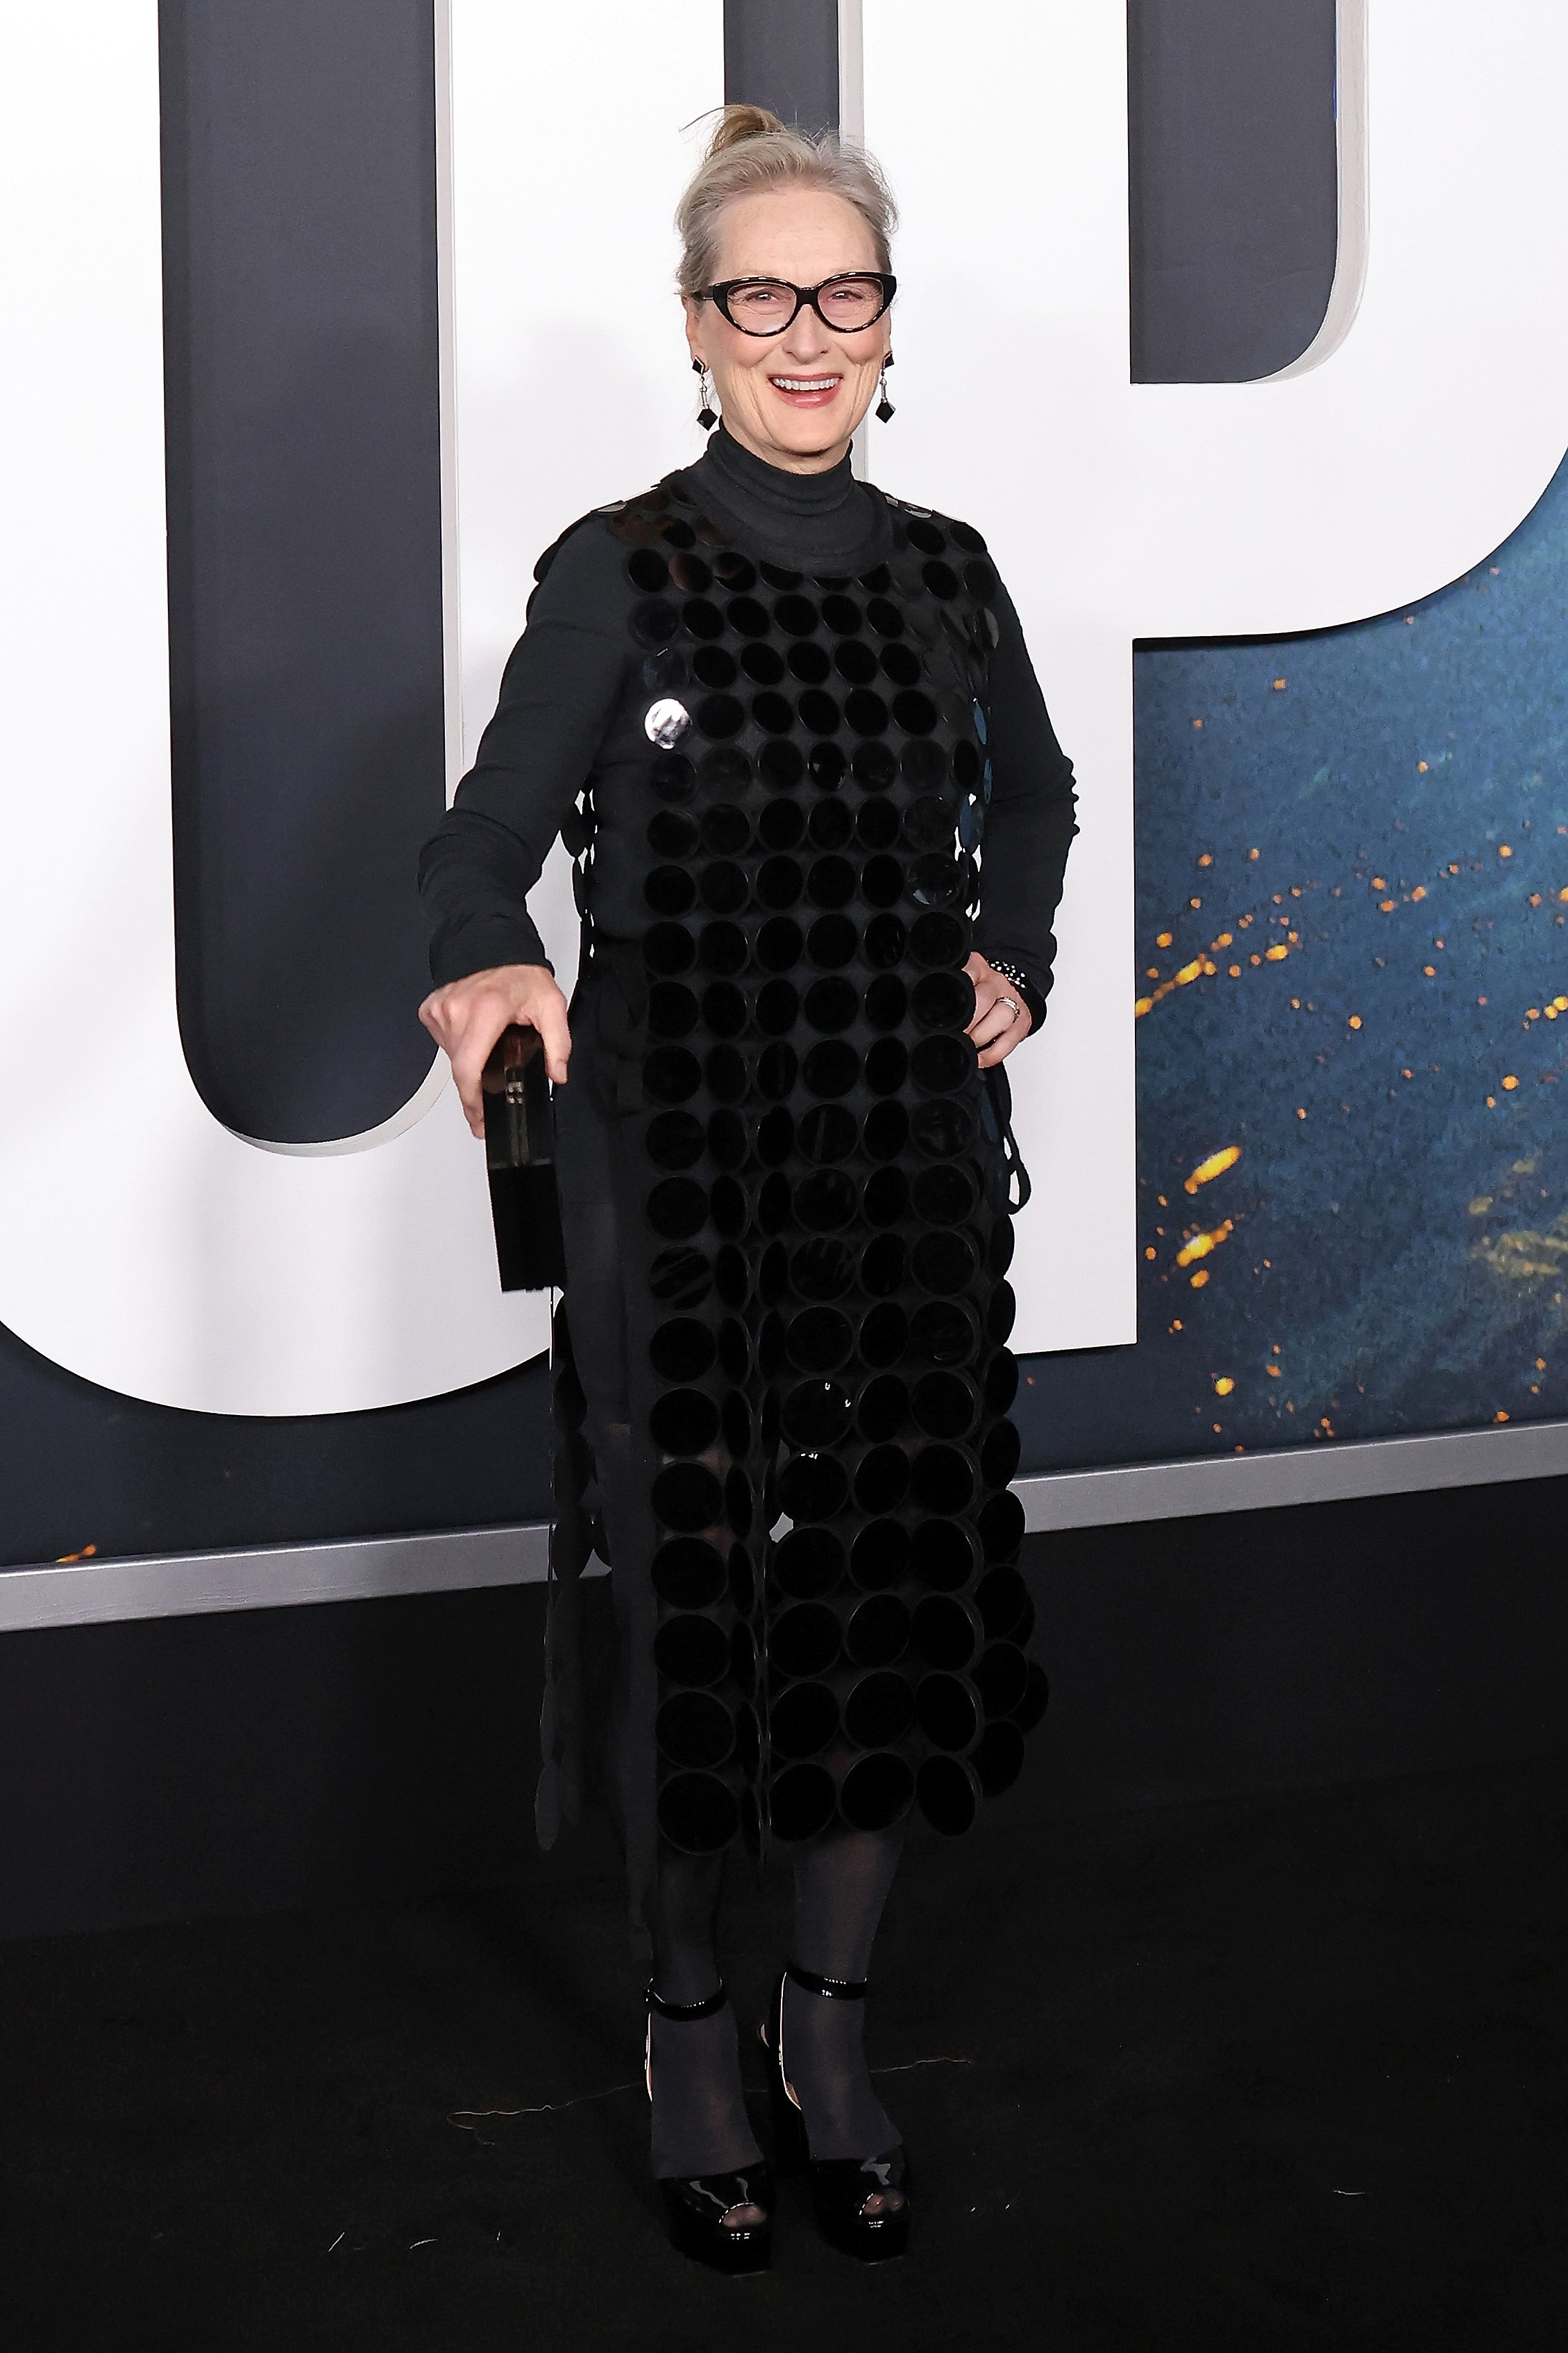 Meryl Streep attends the world premier of Netflix's "Don't Look Up" at Jazz at Lincoln Center in New York City, on December 5, 2021. | Source: Getty Images